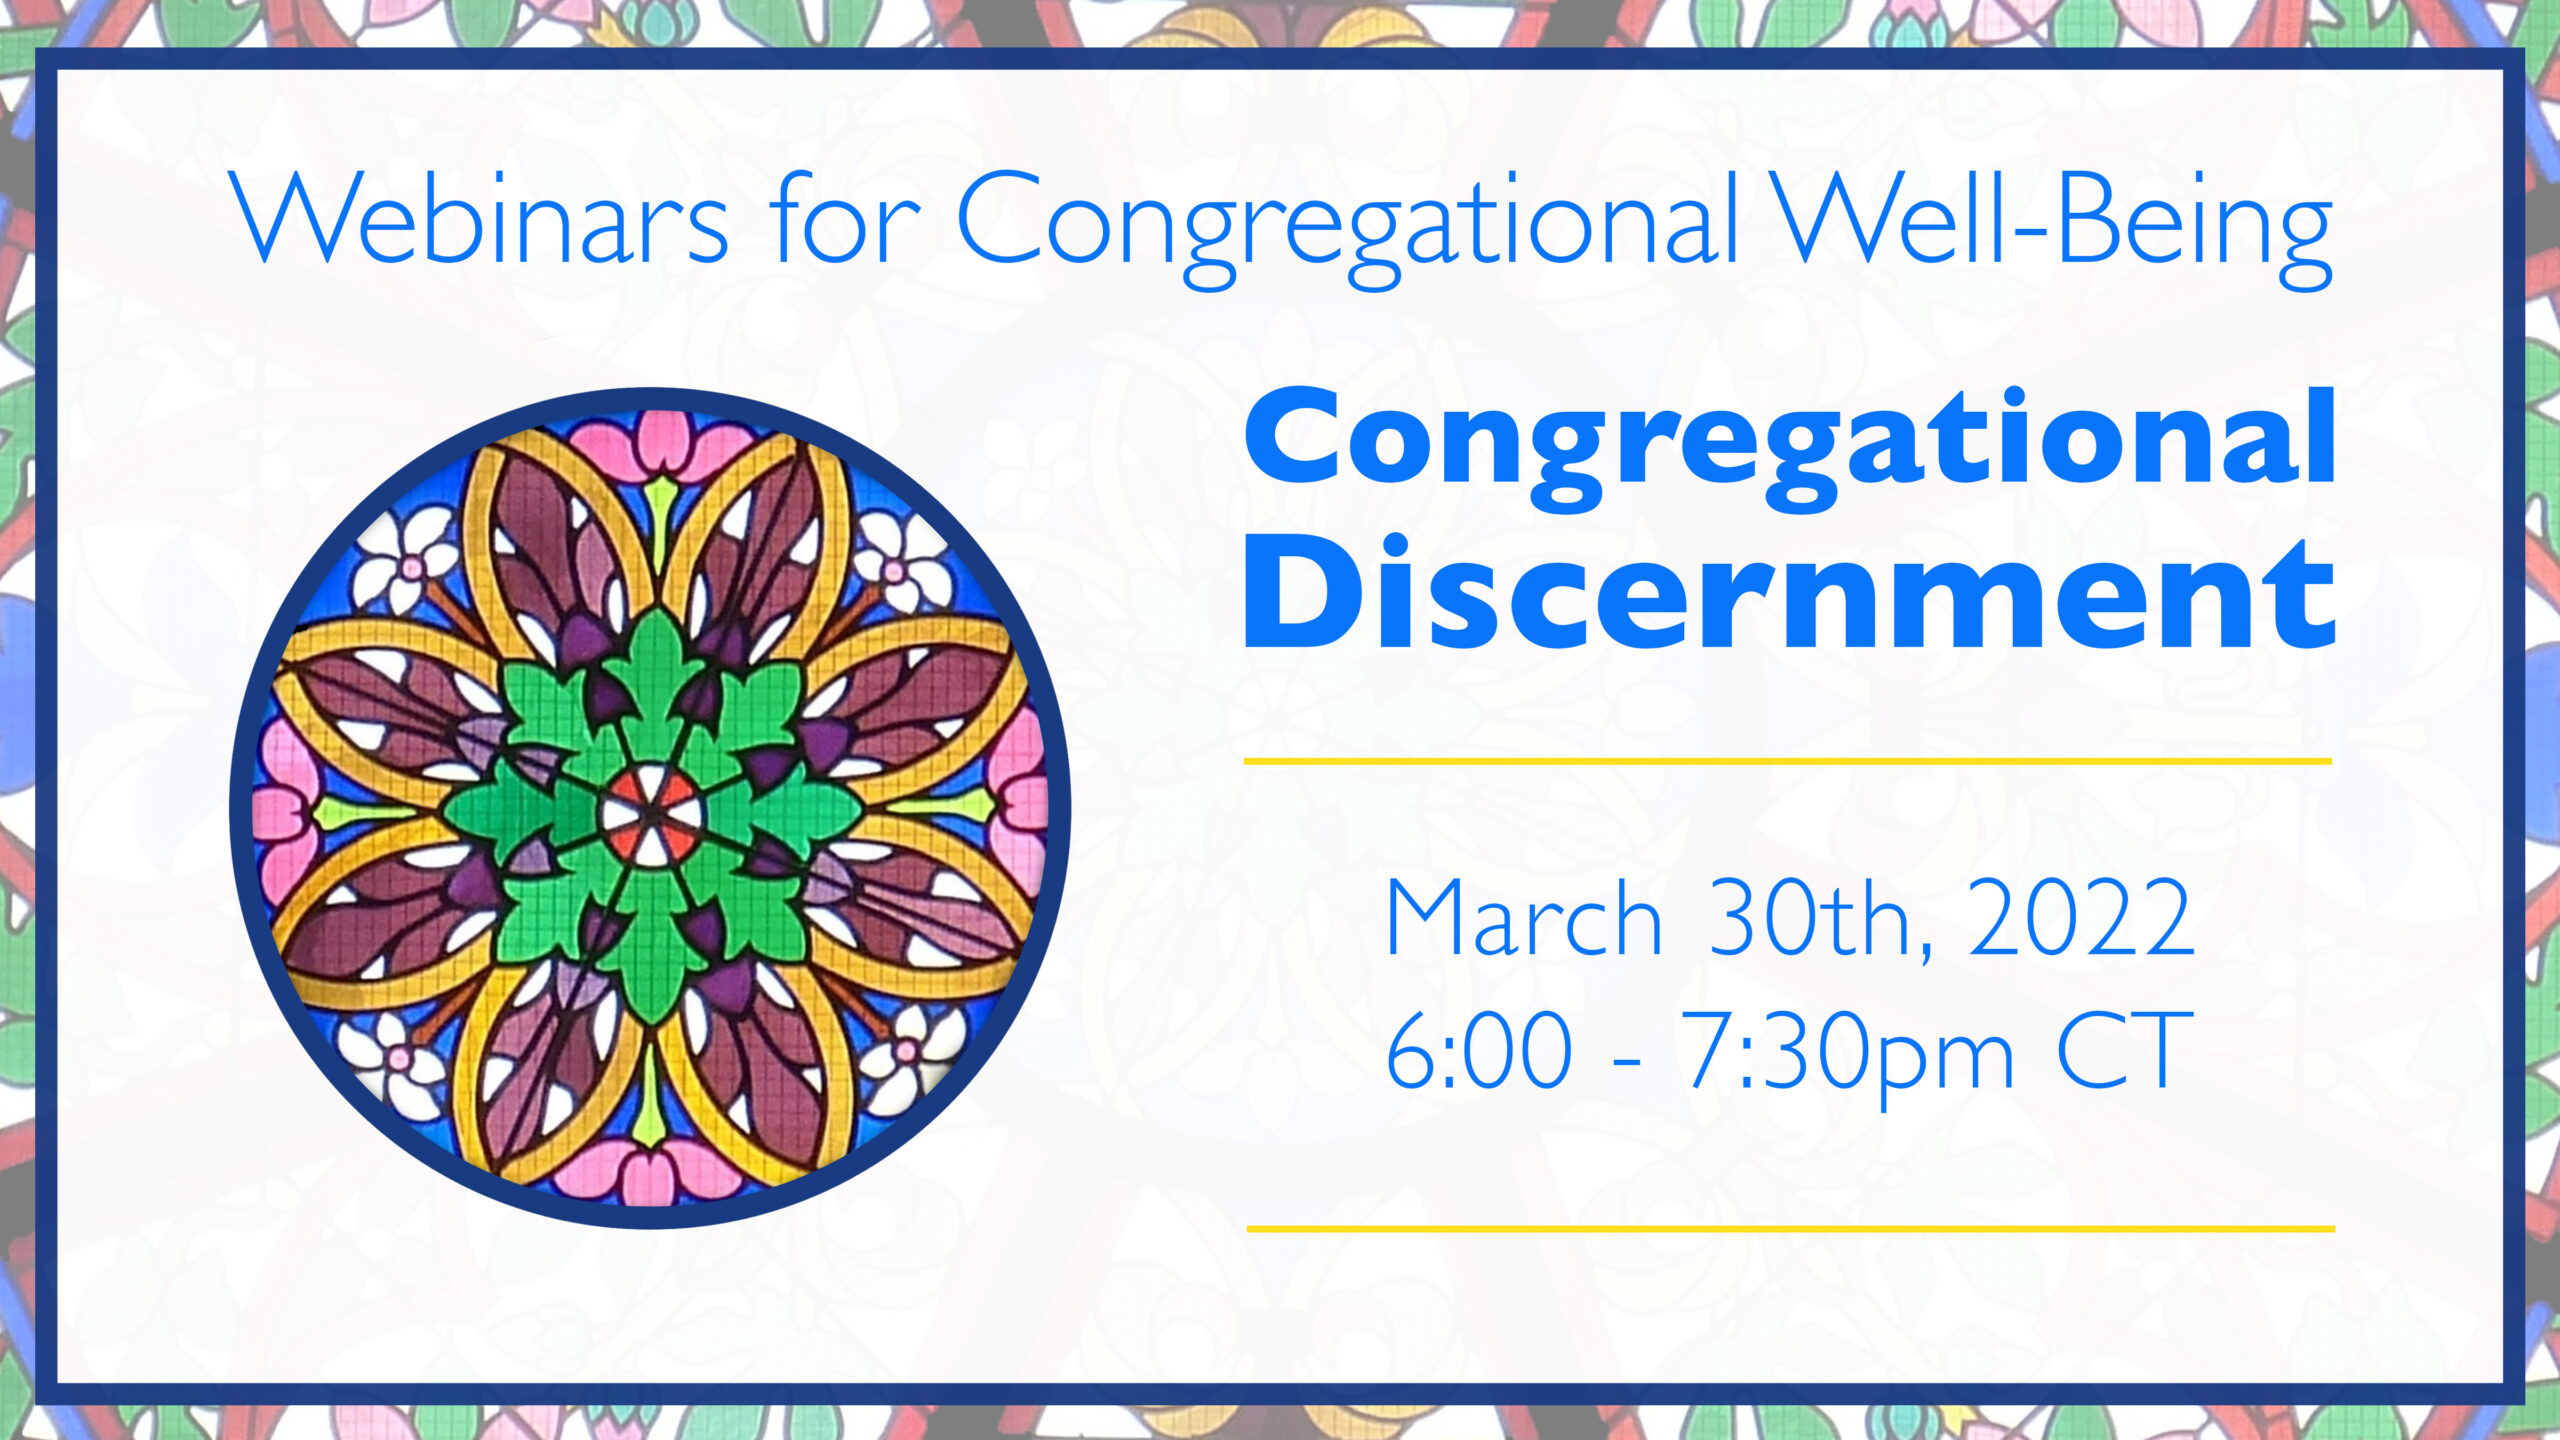 Webinars for Congregational Well-Being: Congregational Discernment - March 30th, 2022 from 6:00 - 7:30pm CT